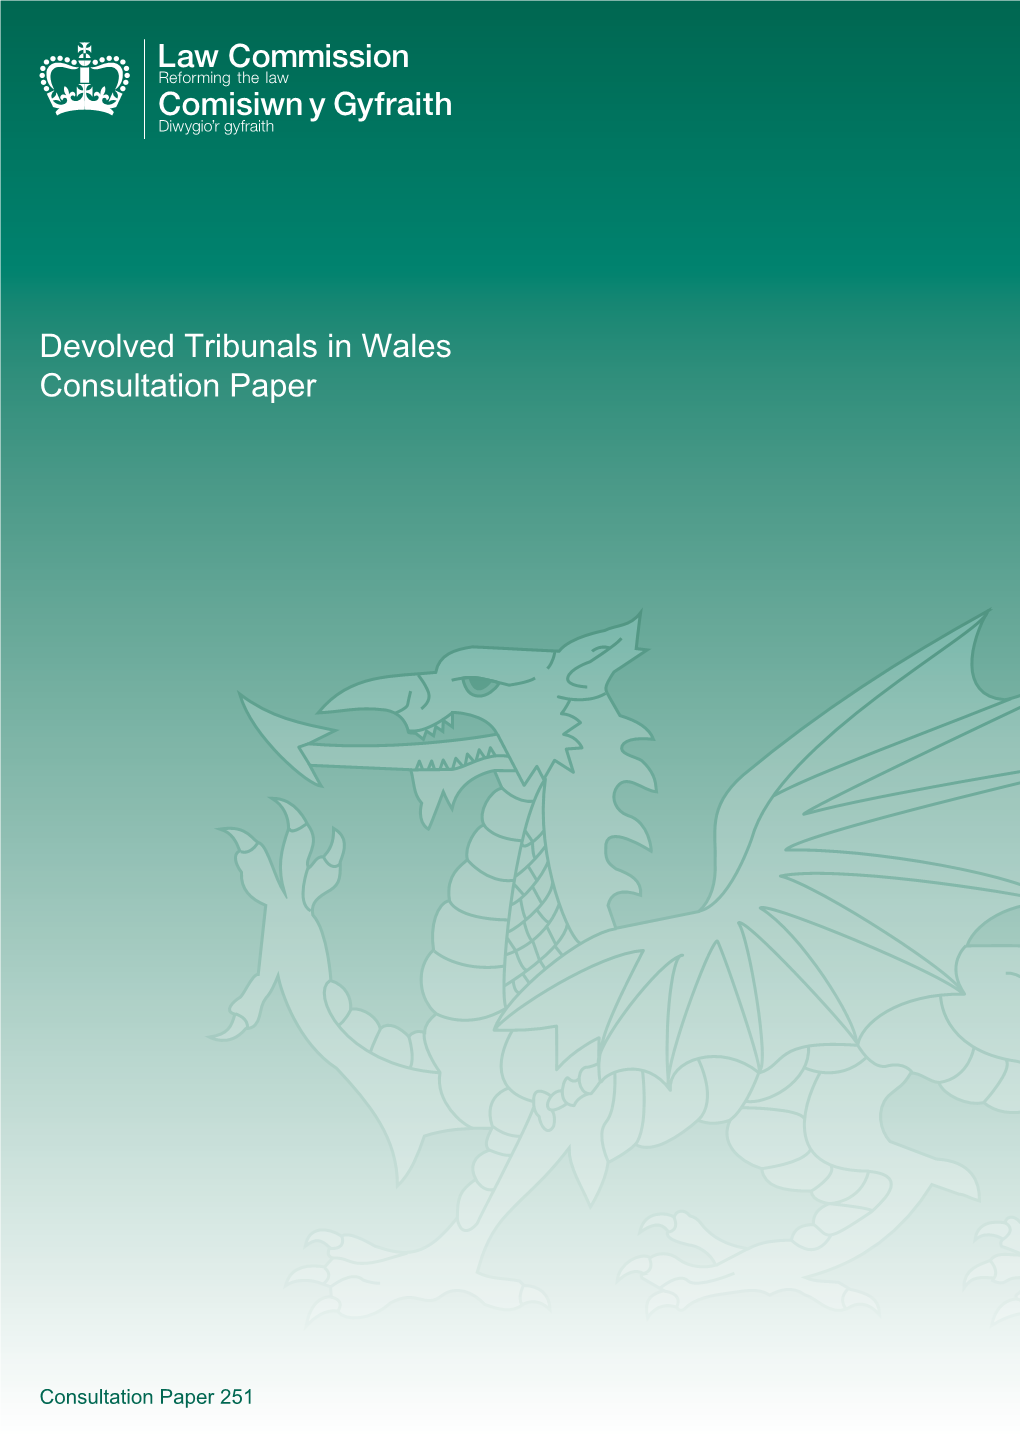 Devolved Tribunals in Wales Consultation Paper